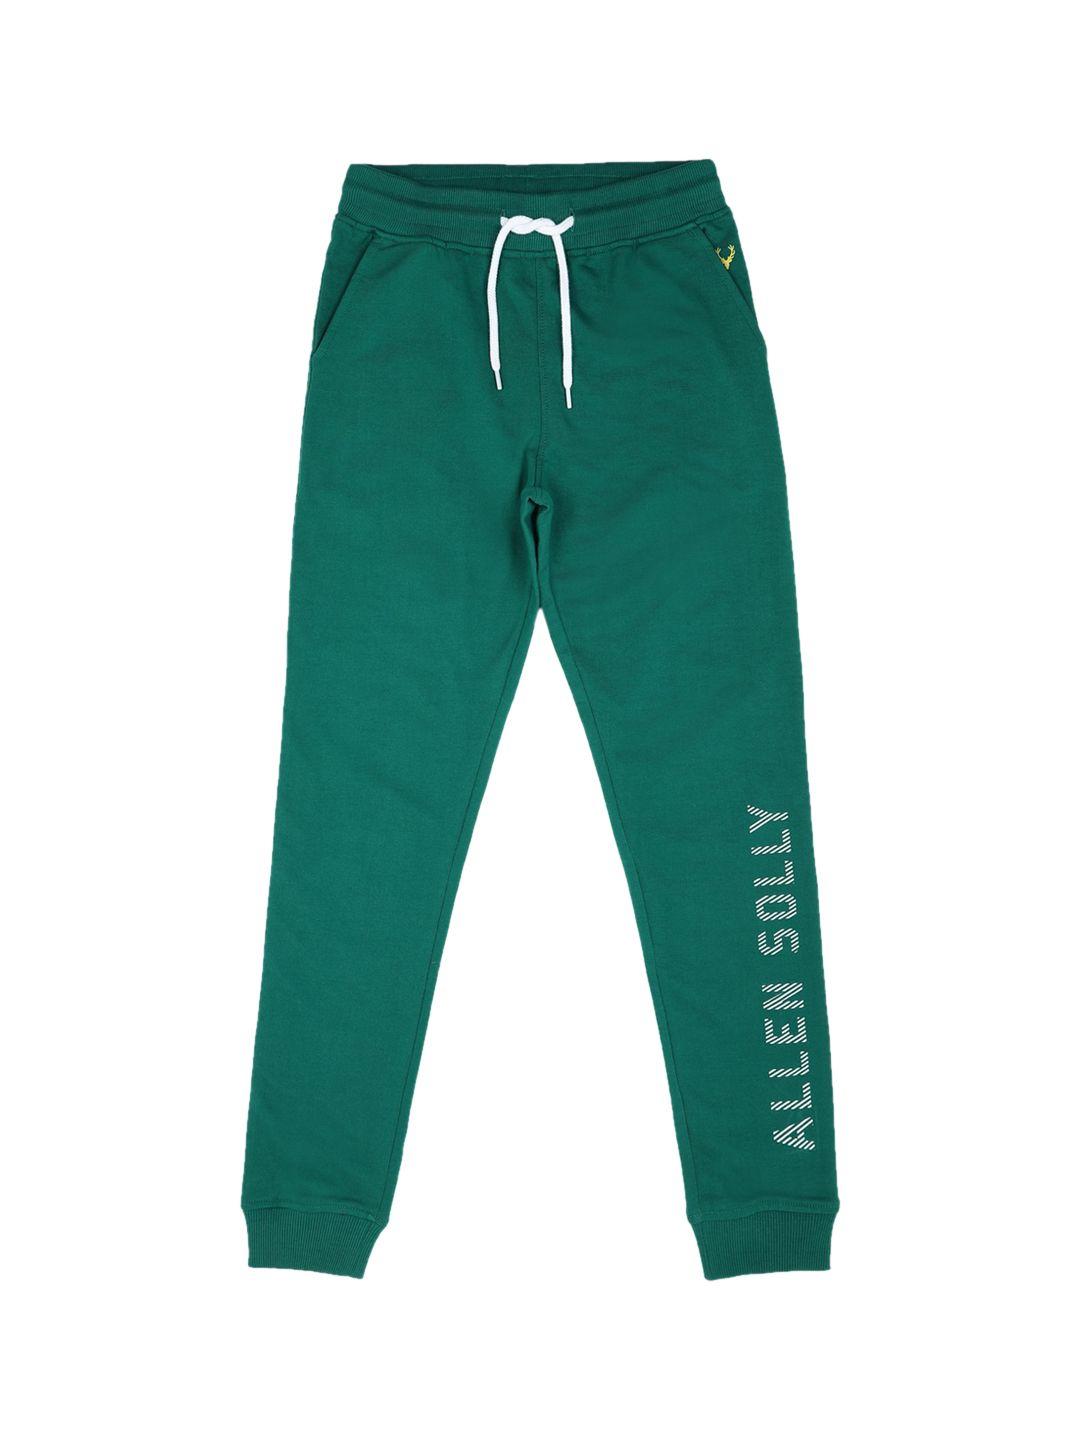 allen-solly-junior-boys-green-&-white-regular-fit-printed-joggers